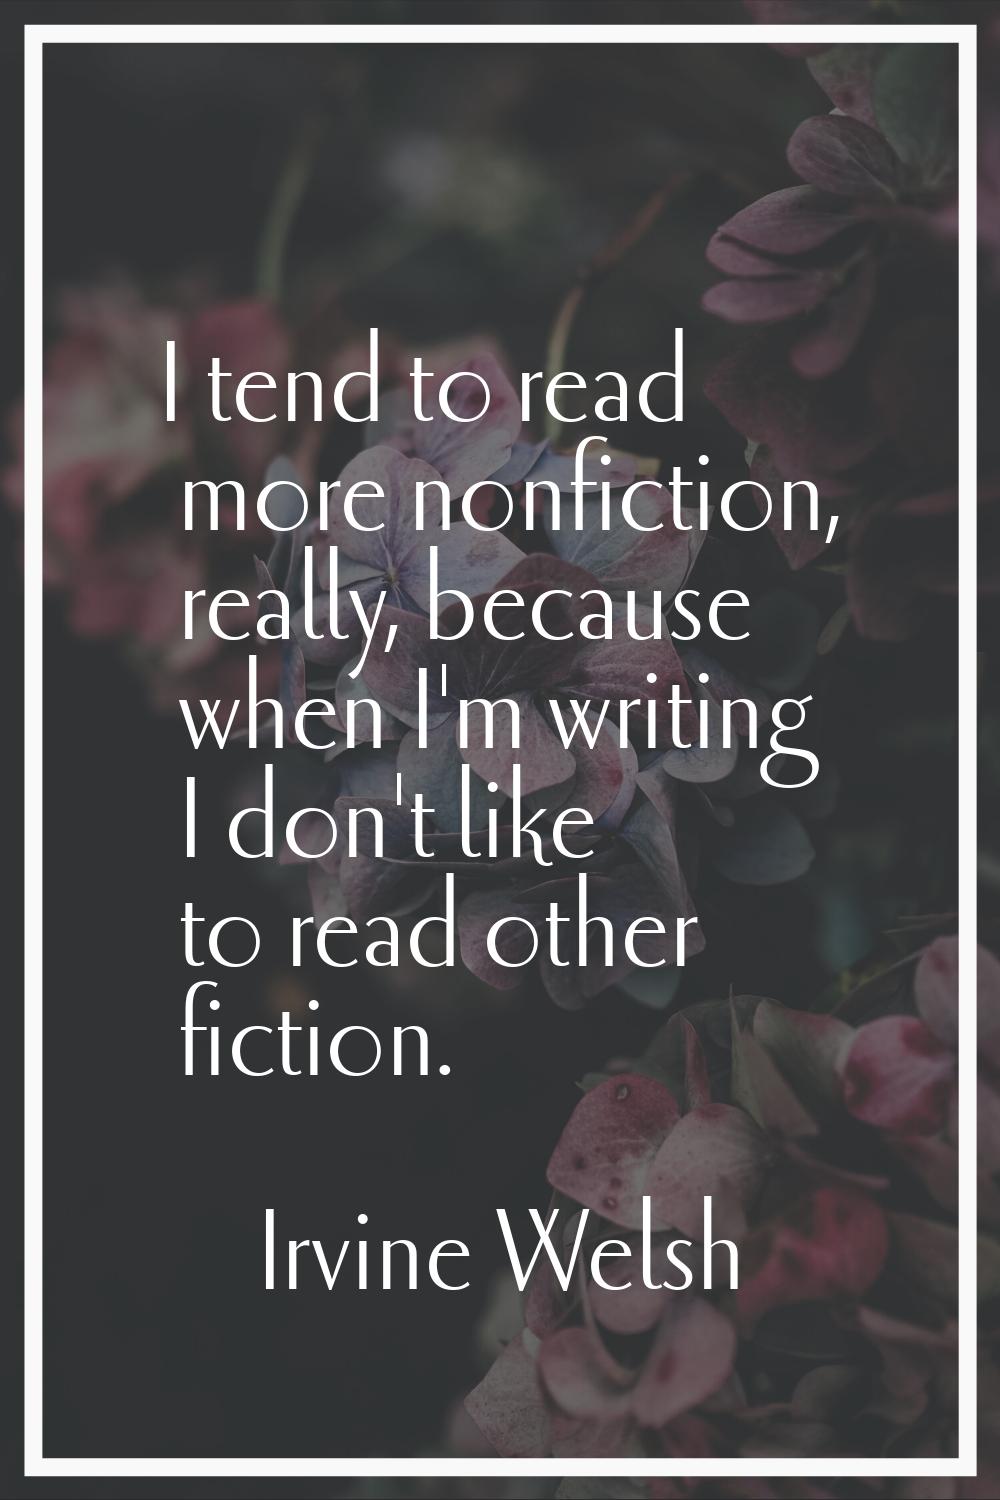 I tend to read more nonfiction, really, because when I'm writing I don't like to read other fiction